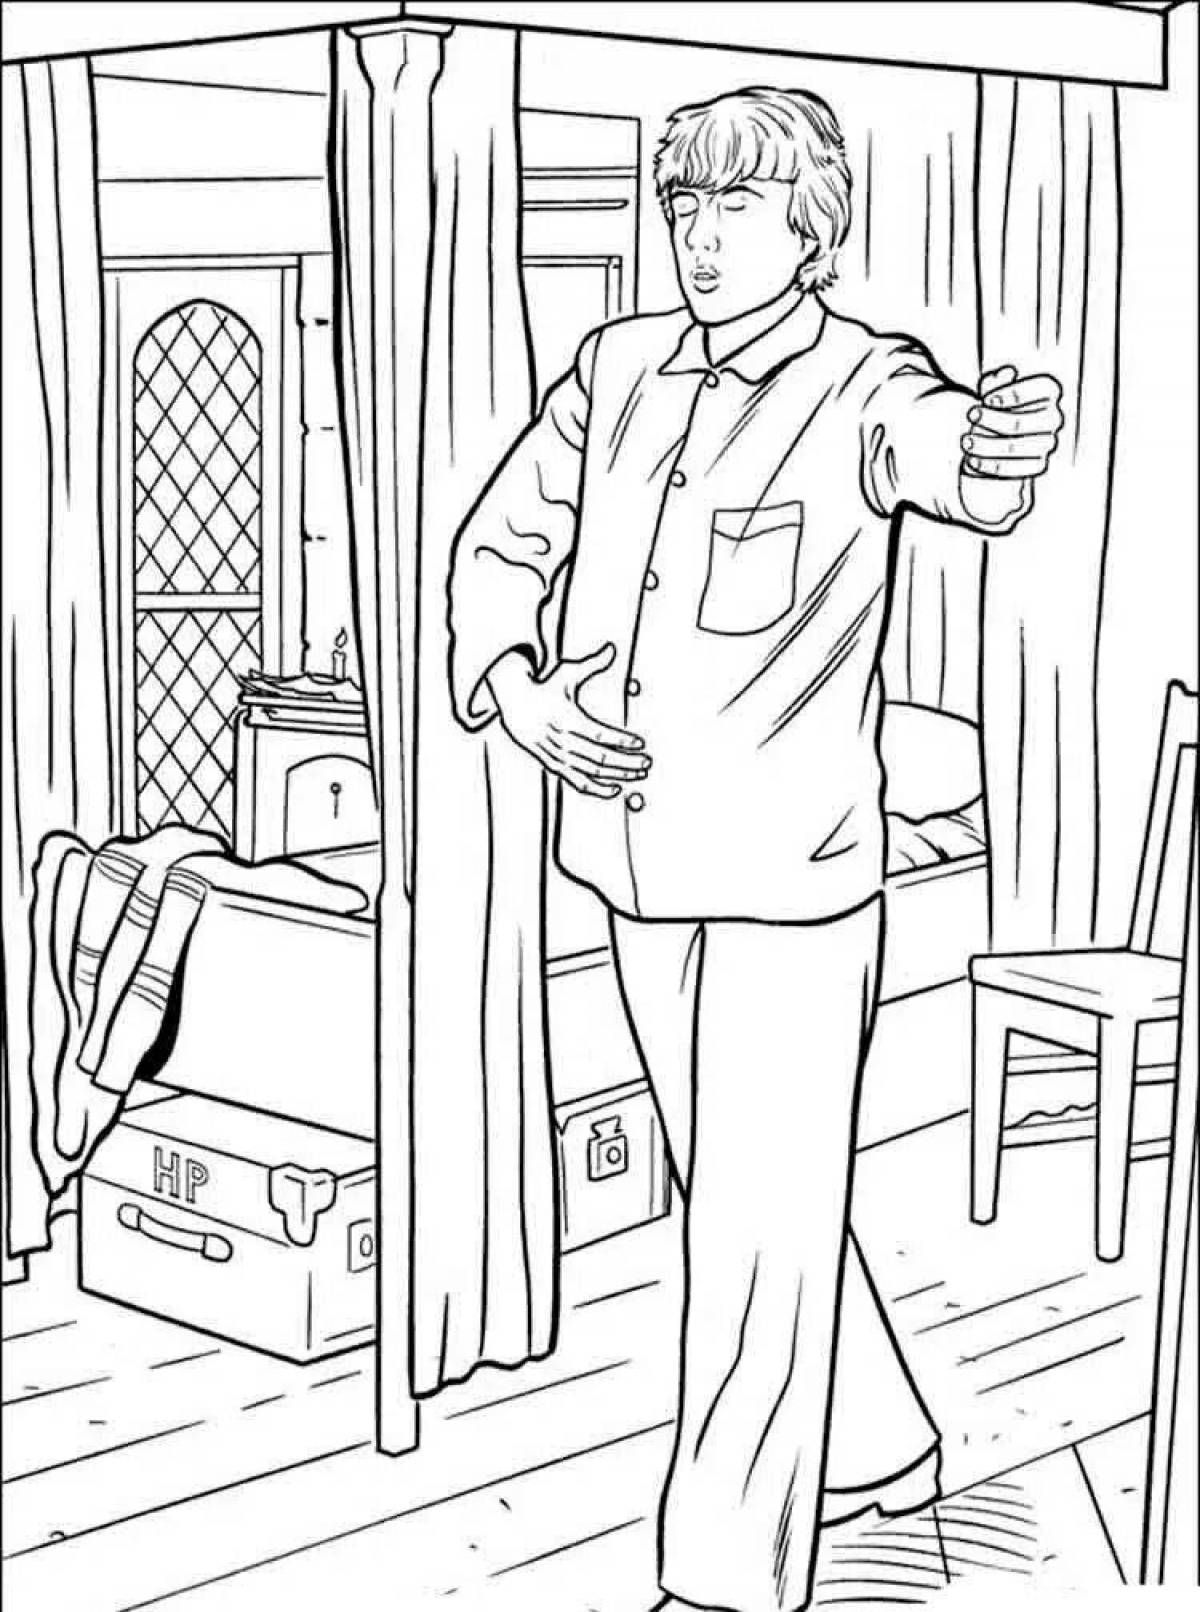 Brave ron coloring page